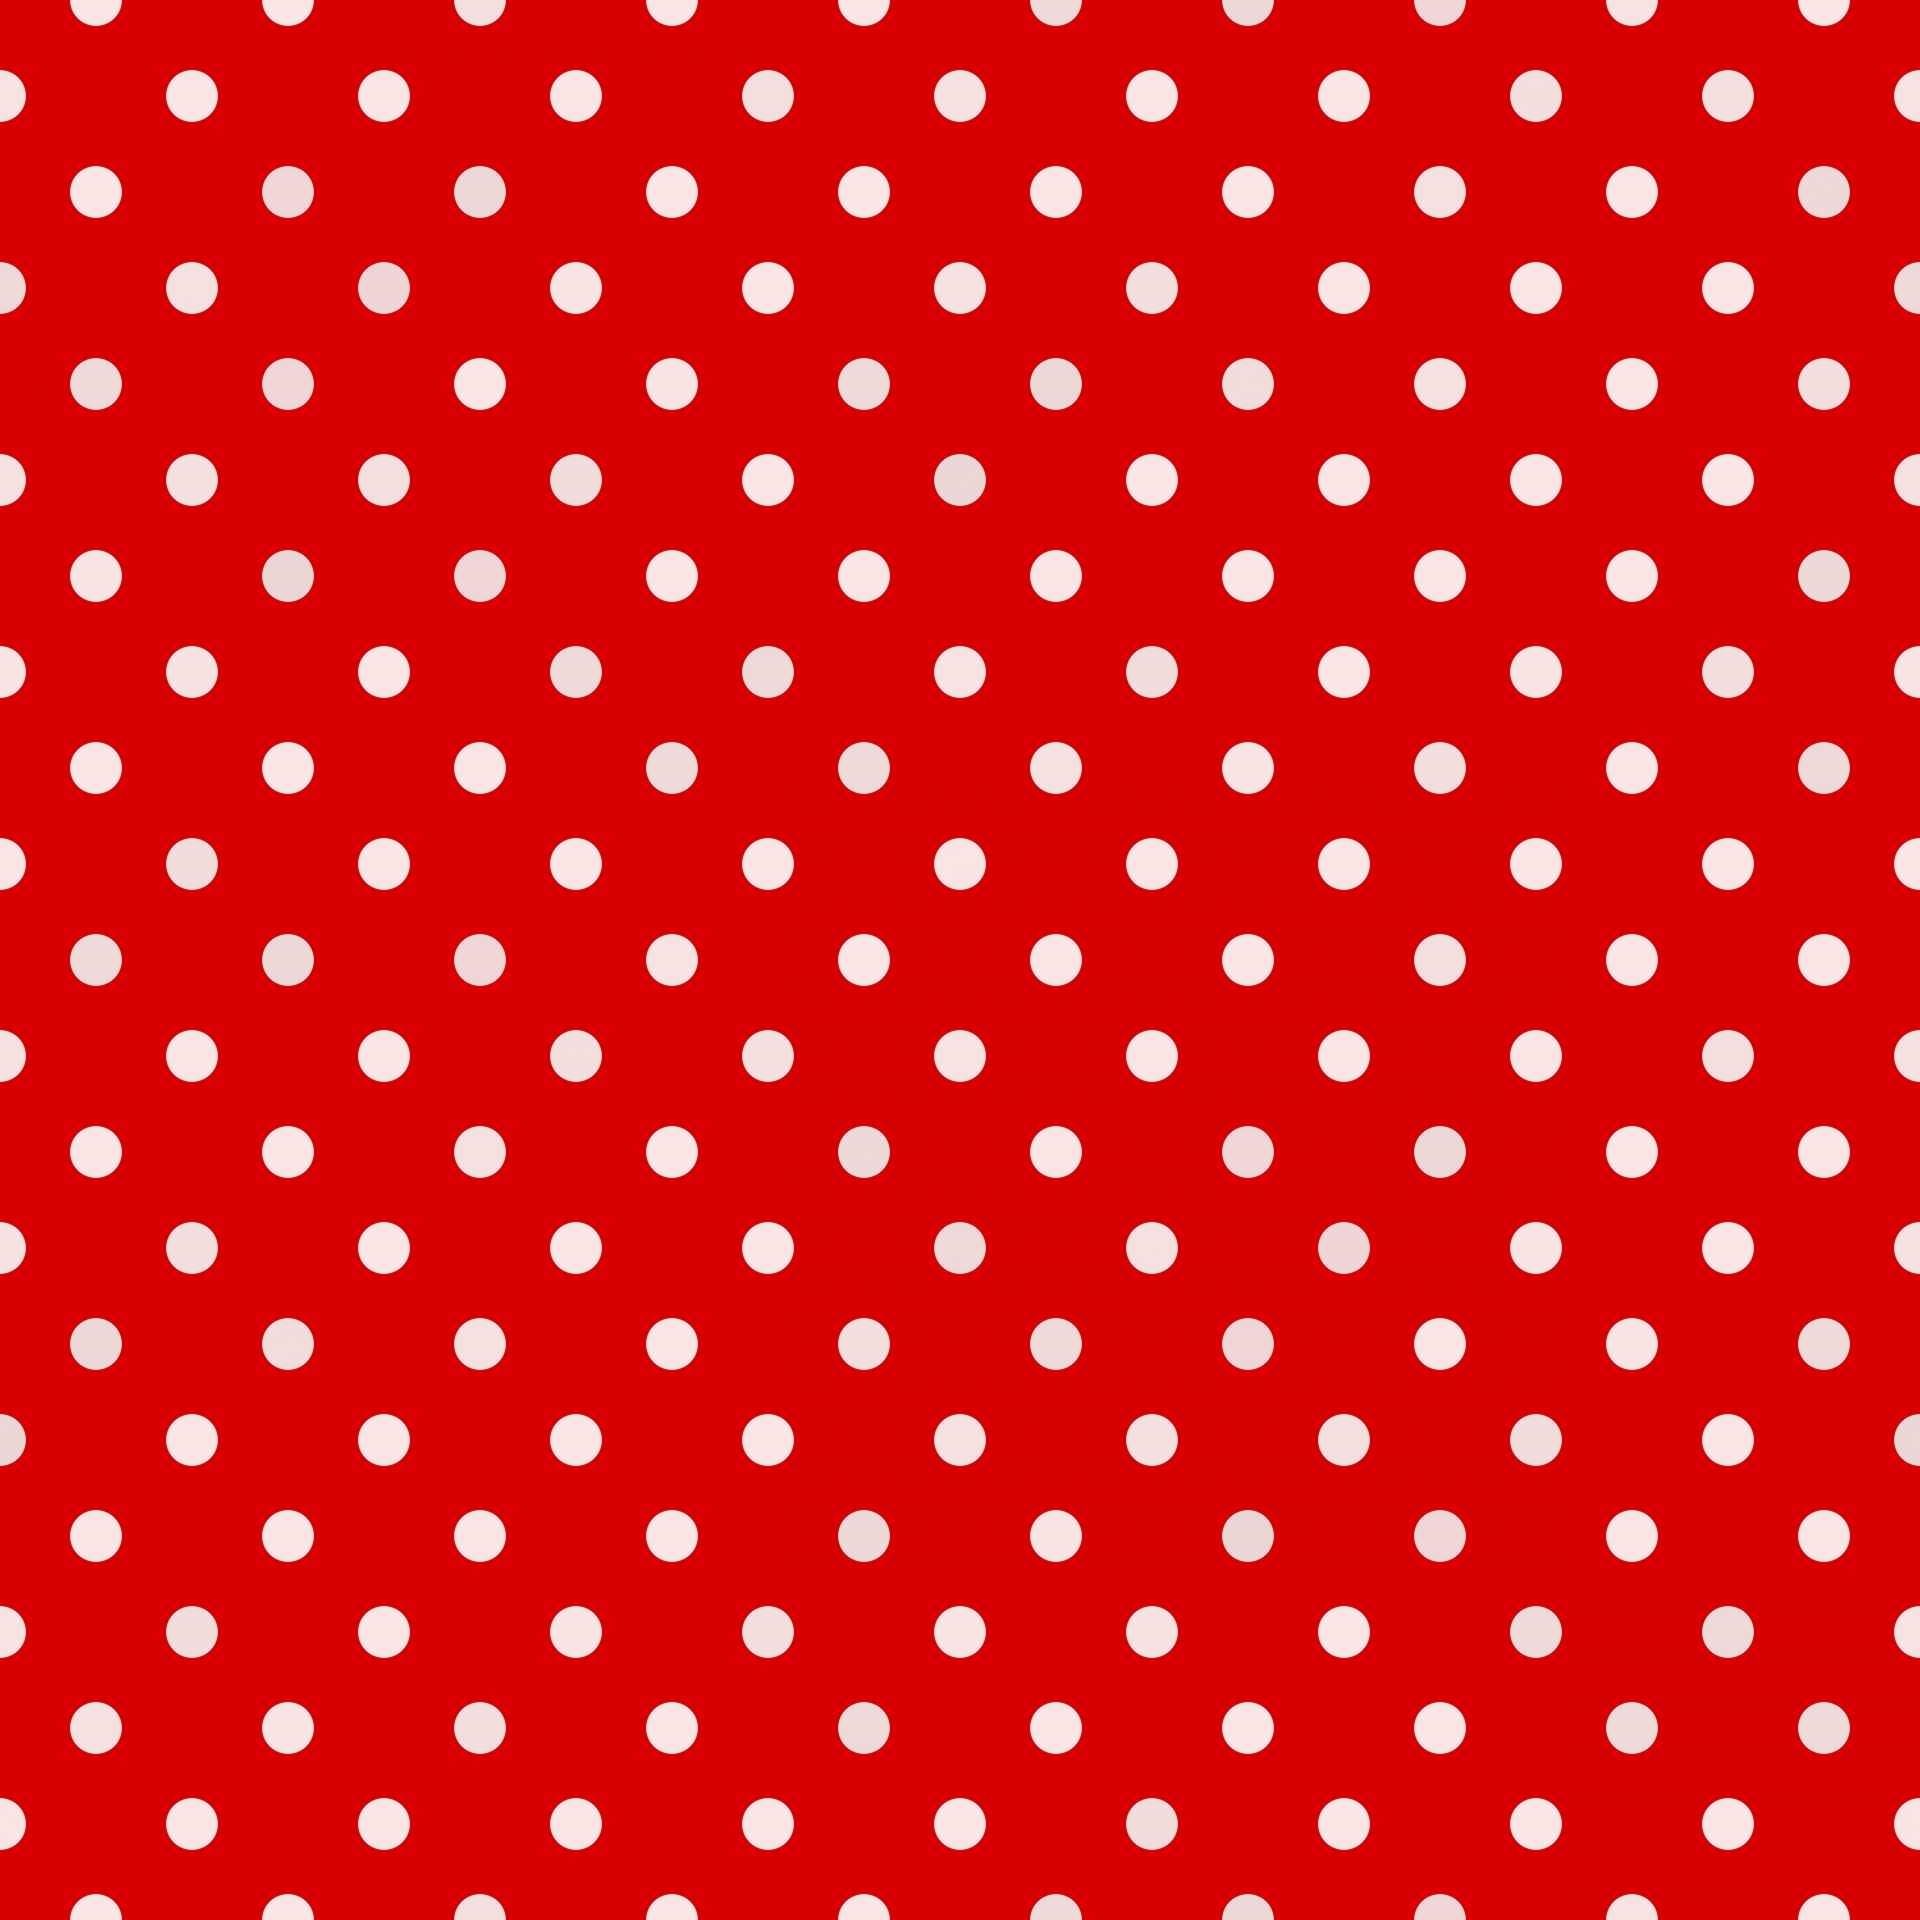 Background dots red white seamless tile pattern graphic vector design patterned artfully retro vintage fabric paper